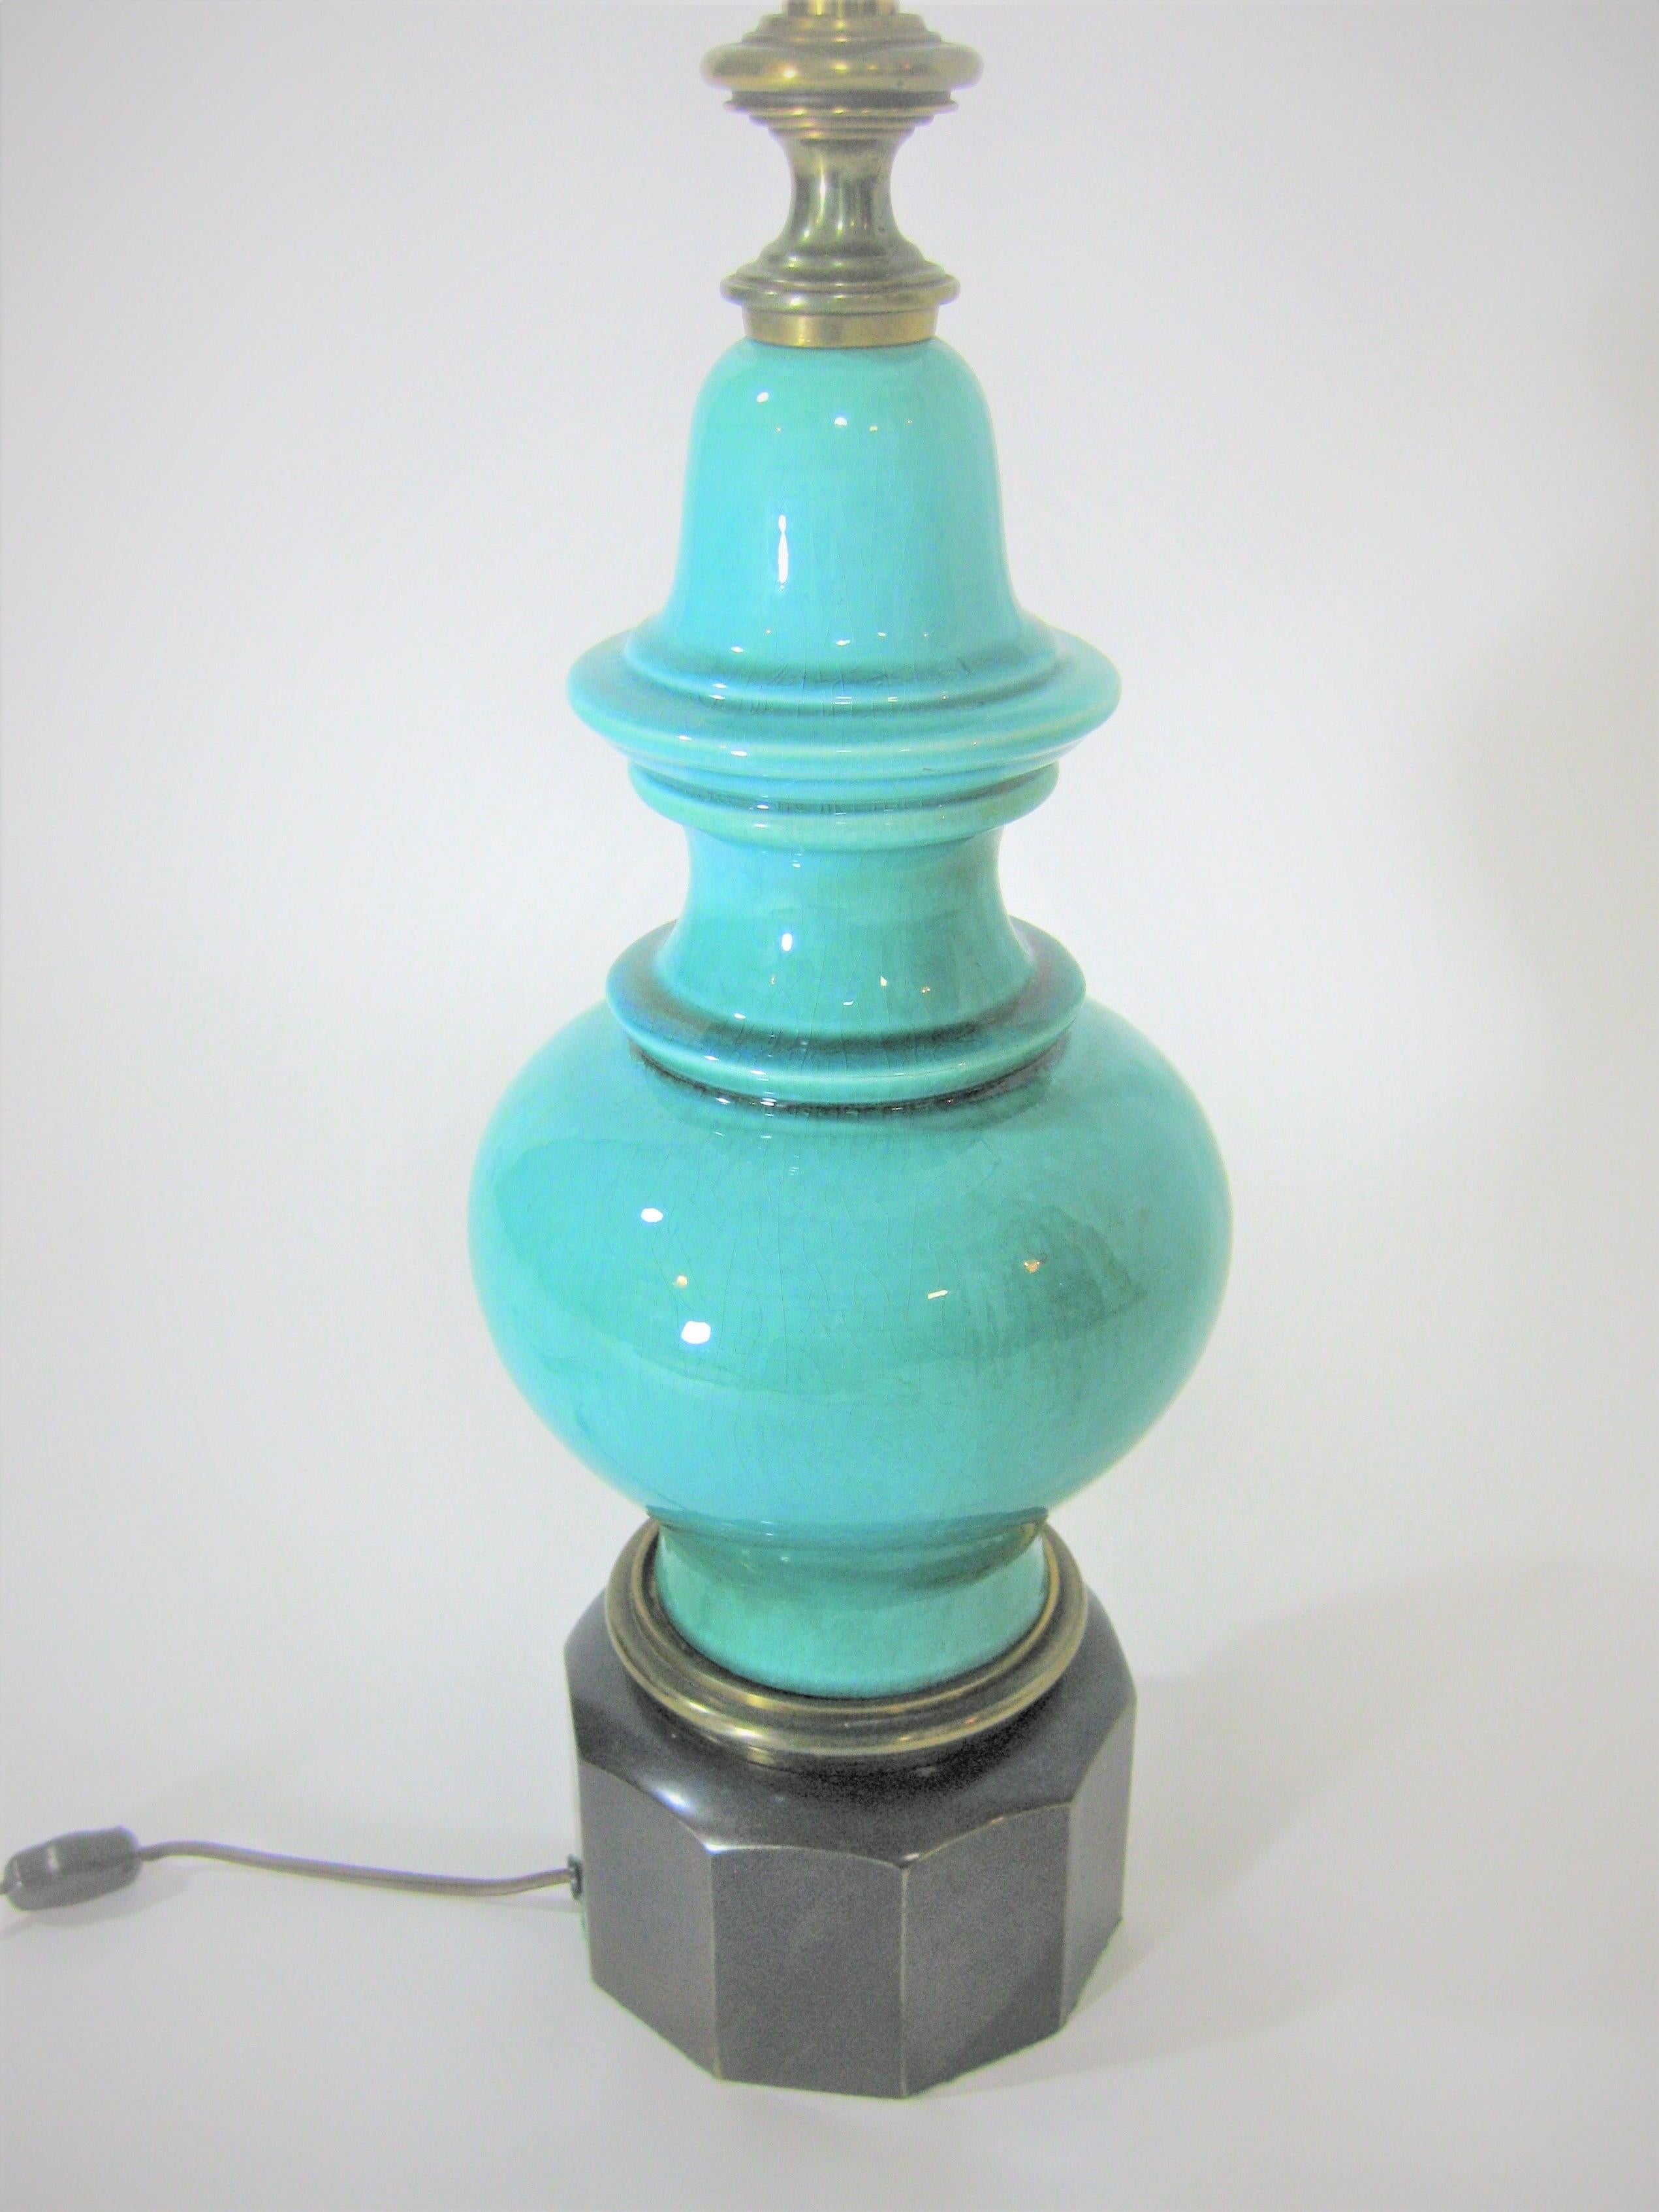 20th Century 1950s Stiffel Lamp Turquoise Crackle Glaze Ceramic and Brass For Sale